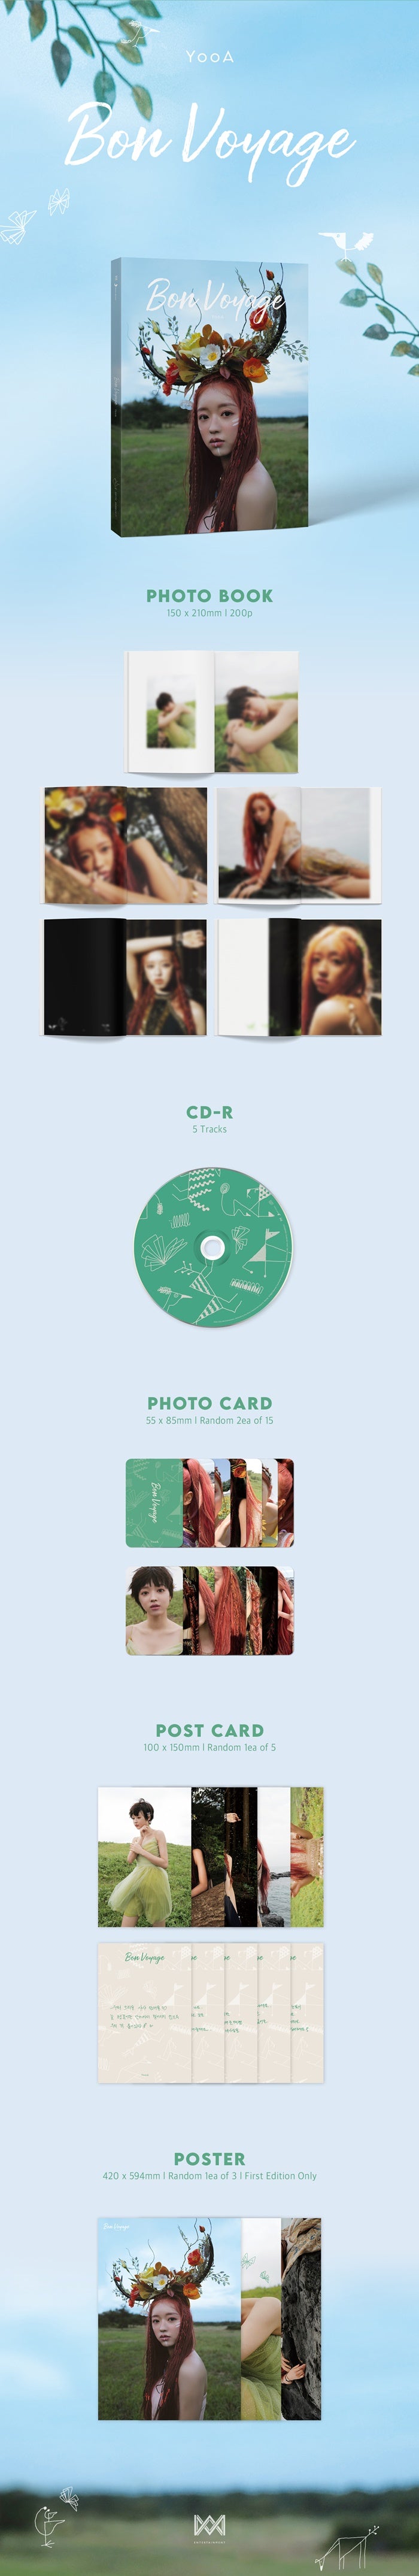 1 CD
1 Photo Book (200 pages)
2 Photo Cards
1 Postcard